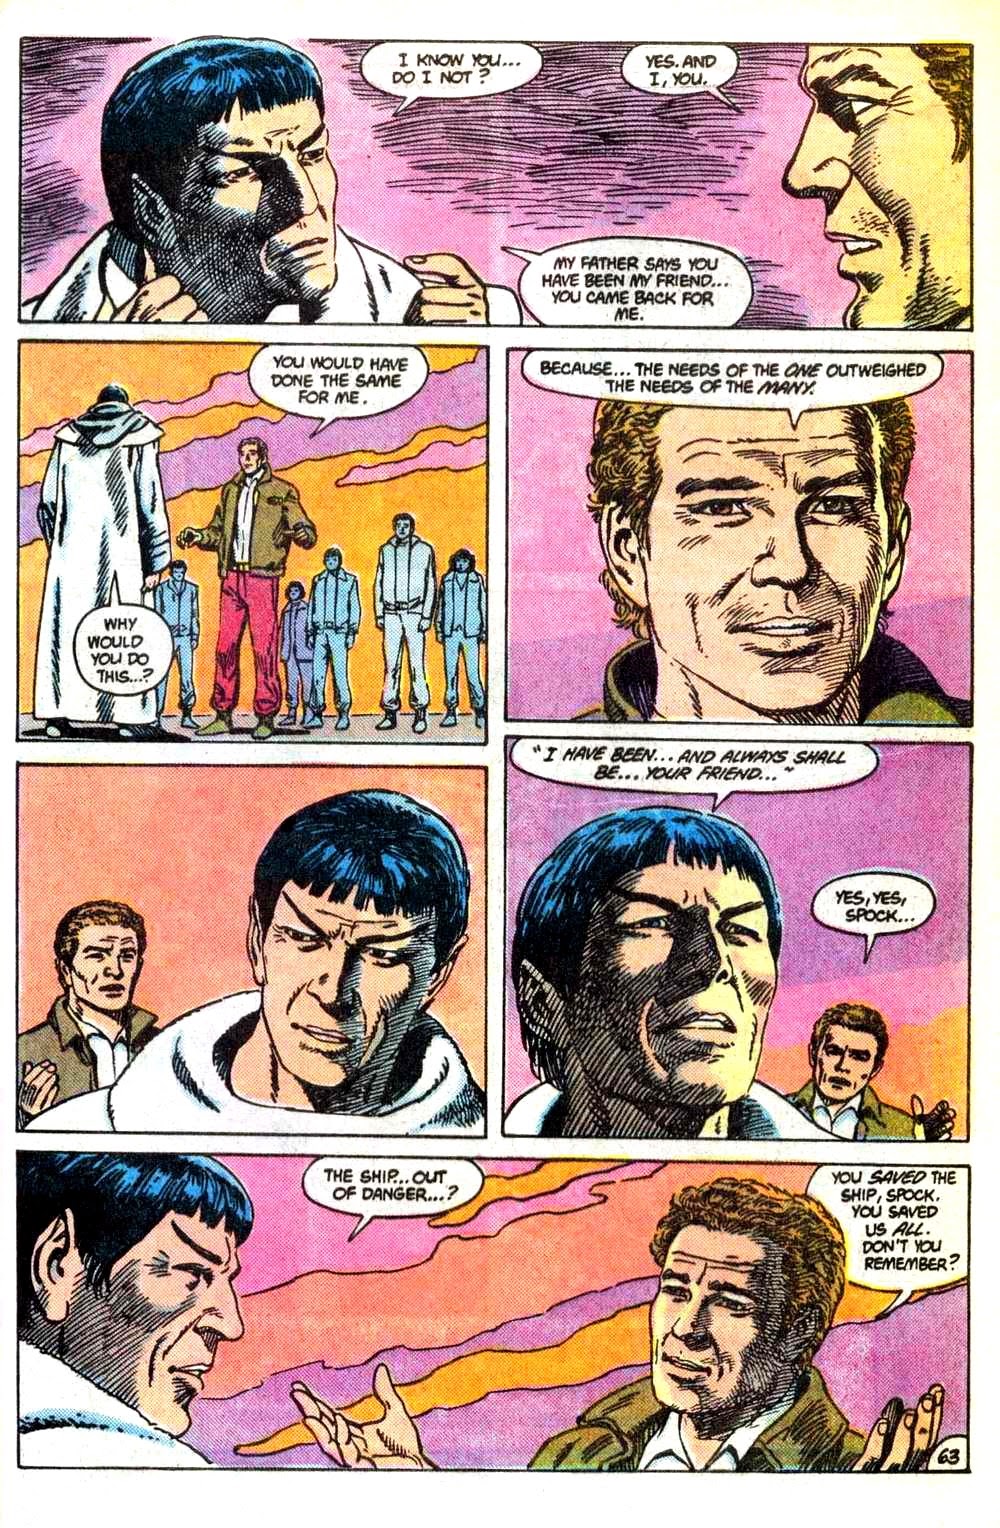 Read online Star Trek III: The Search for Spock comic -  Issue # Full - 65